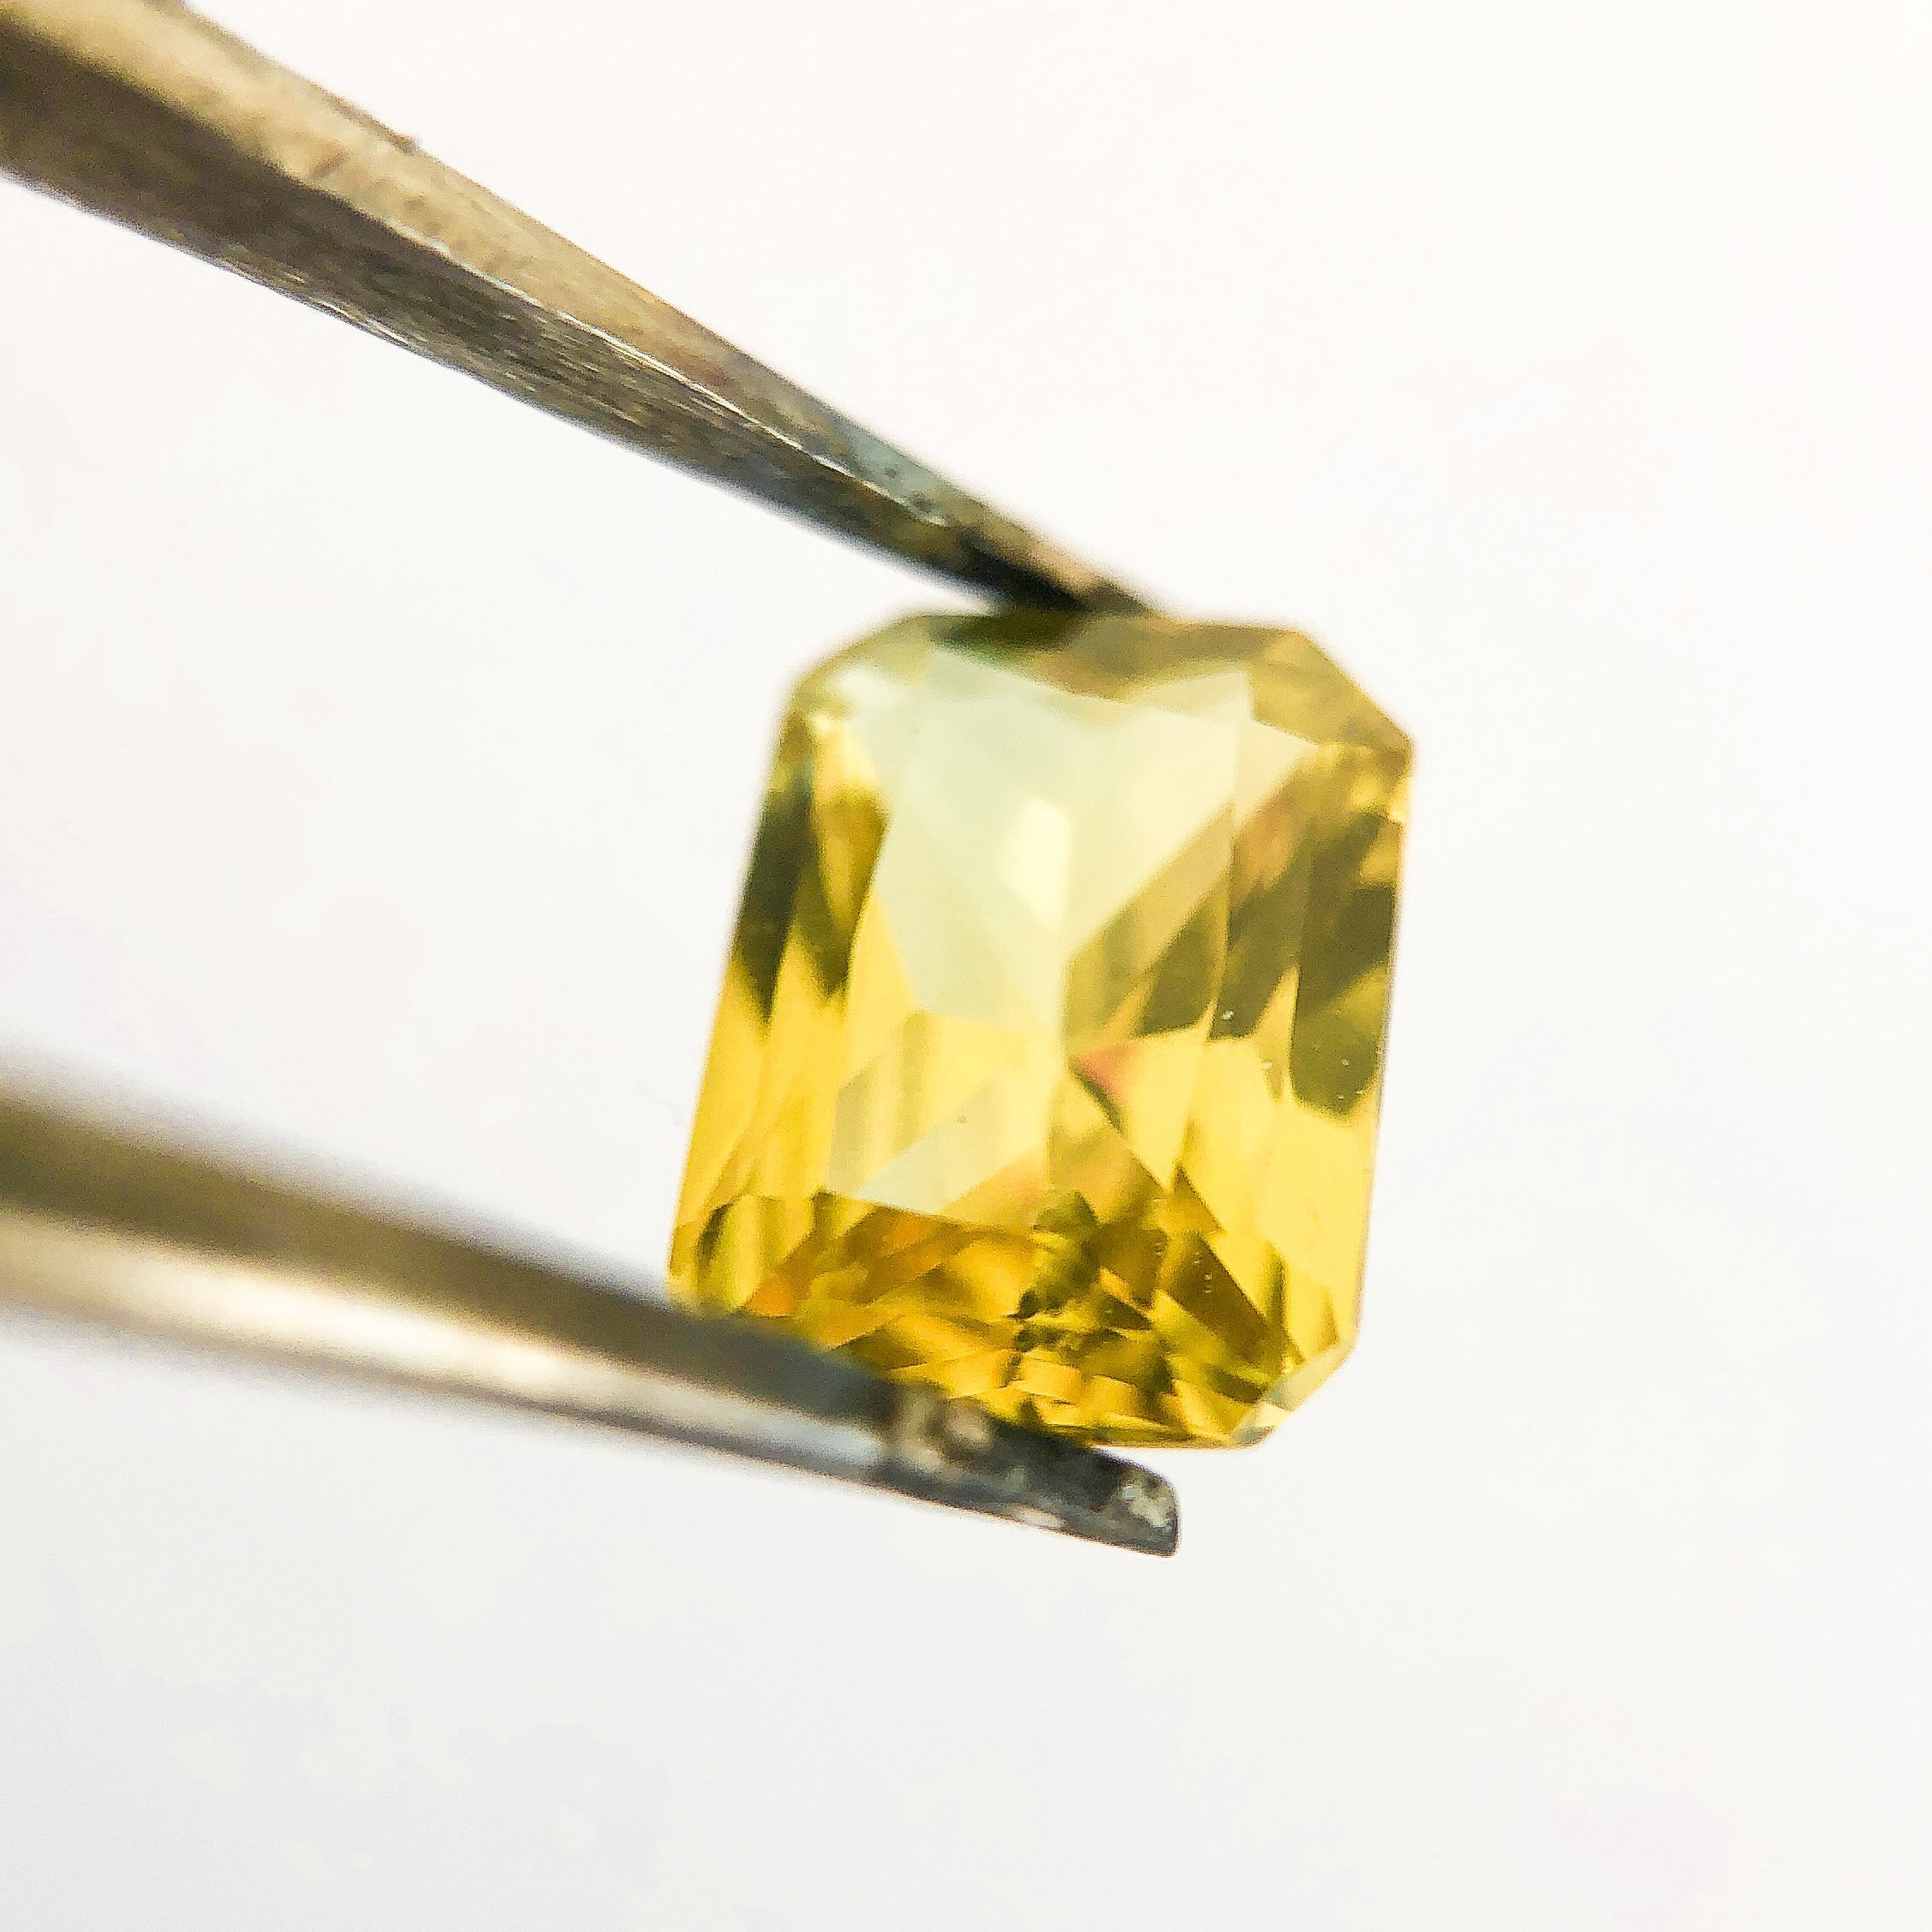 Ethical birthstones, gemstones and the meaning behind them